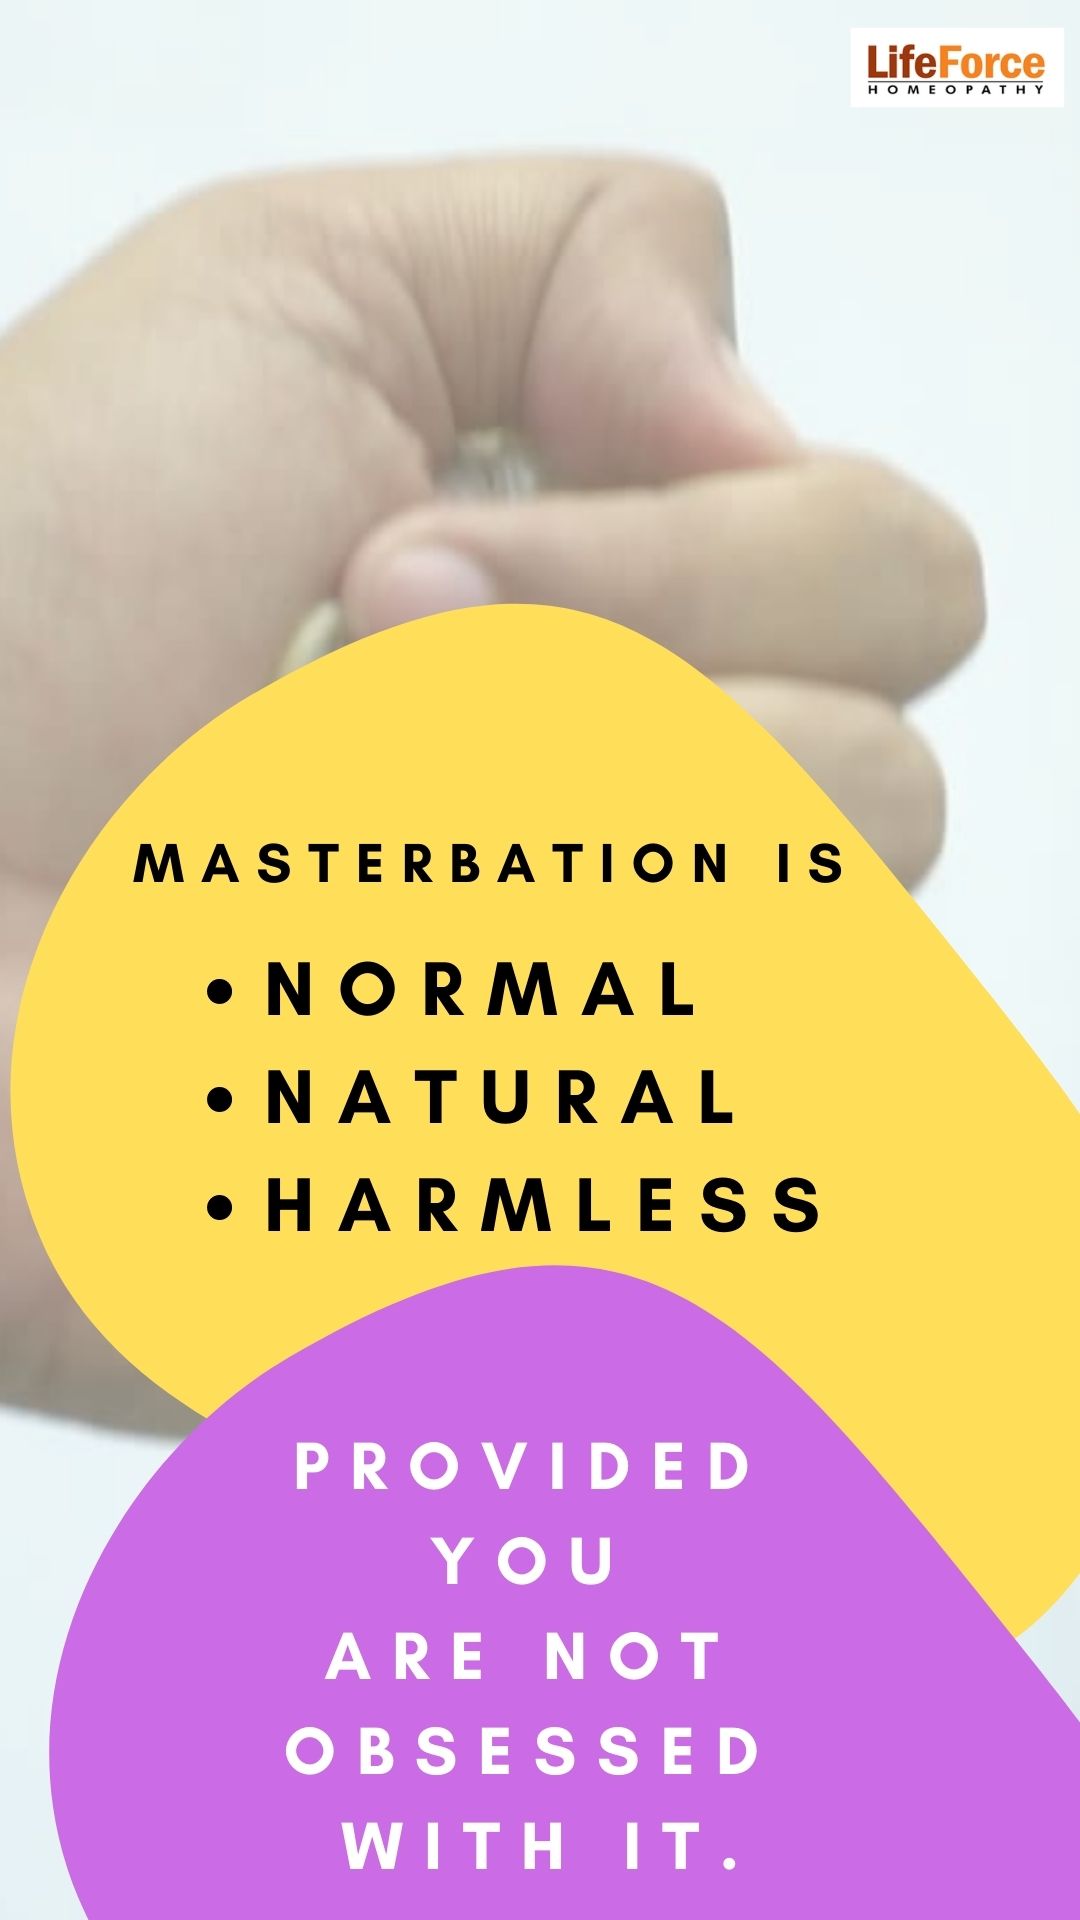 Masturbation Syndrome Myths And Facts To Know About It image image